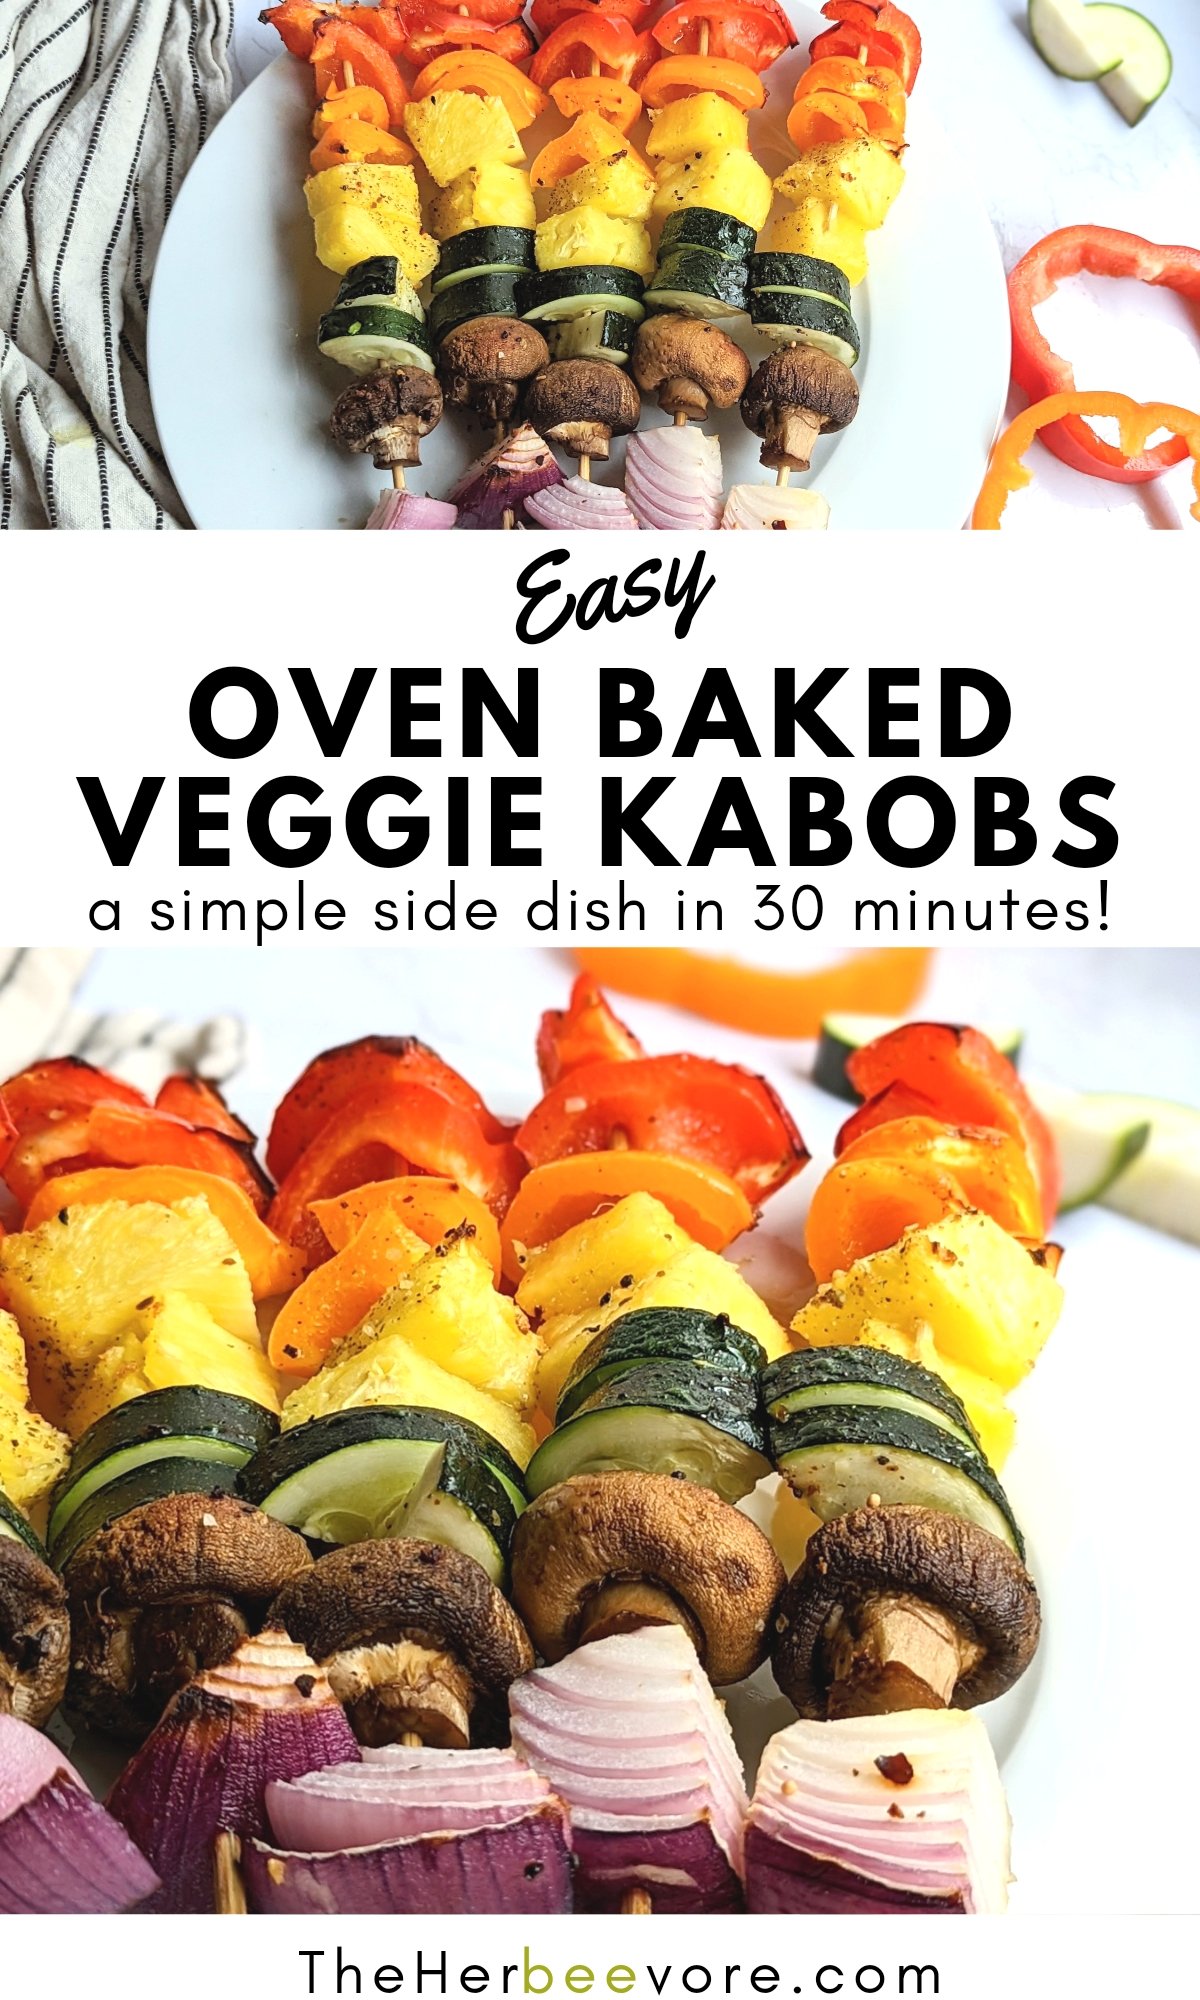 how to cook vegetable kabobs in the oven at home no grill oven baked veggie kebabs recipe vegan gluten free vegetarian whole30 party entertaining super bowl sunday recipes